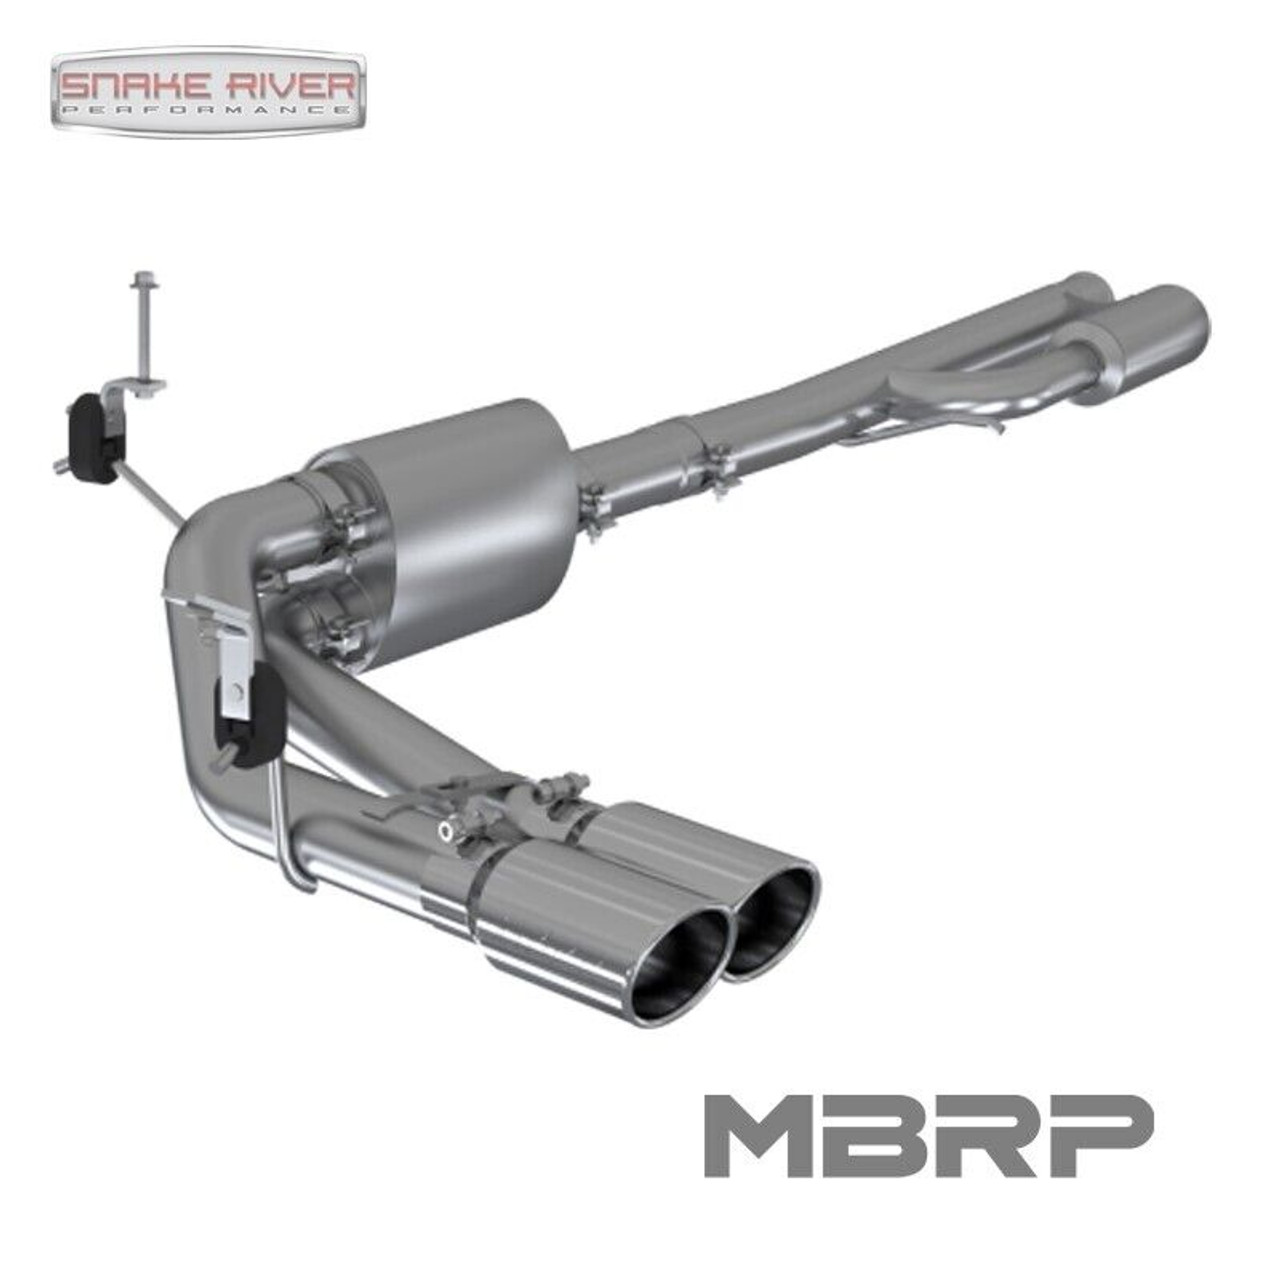 MBRP 3" PRE AXLE STAINLESS EXHAUST FOR 19-21 SILVERADO GMC SIERRA 1500 5.3L 4.3L